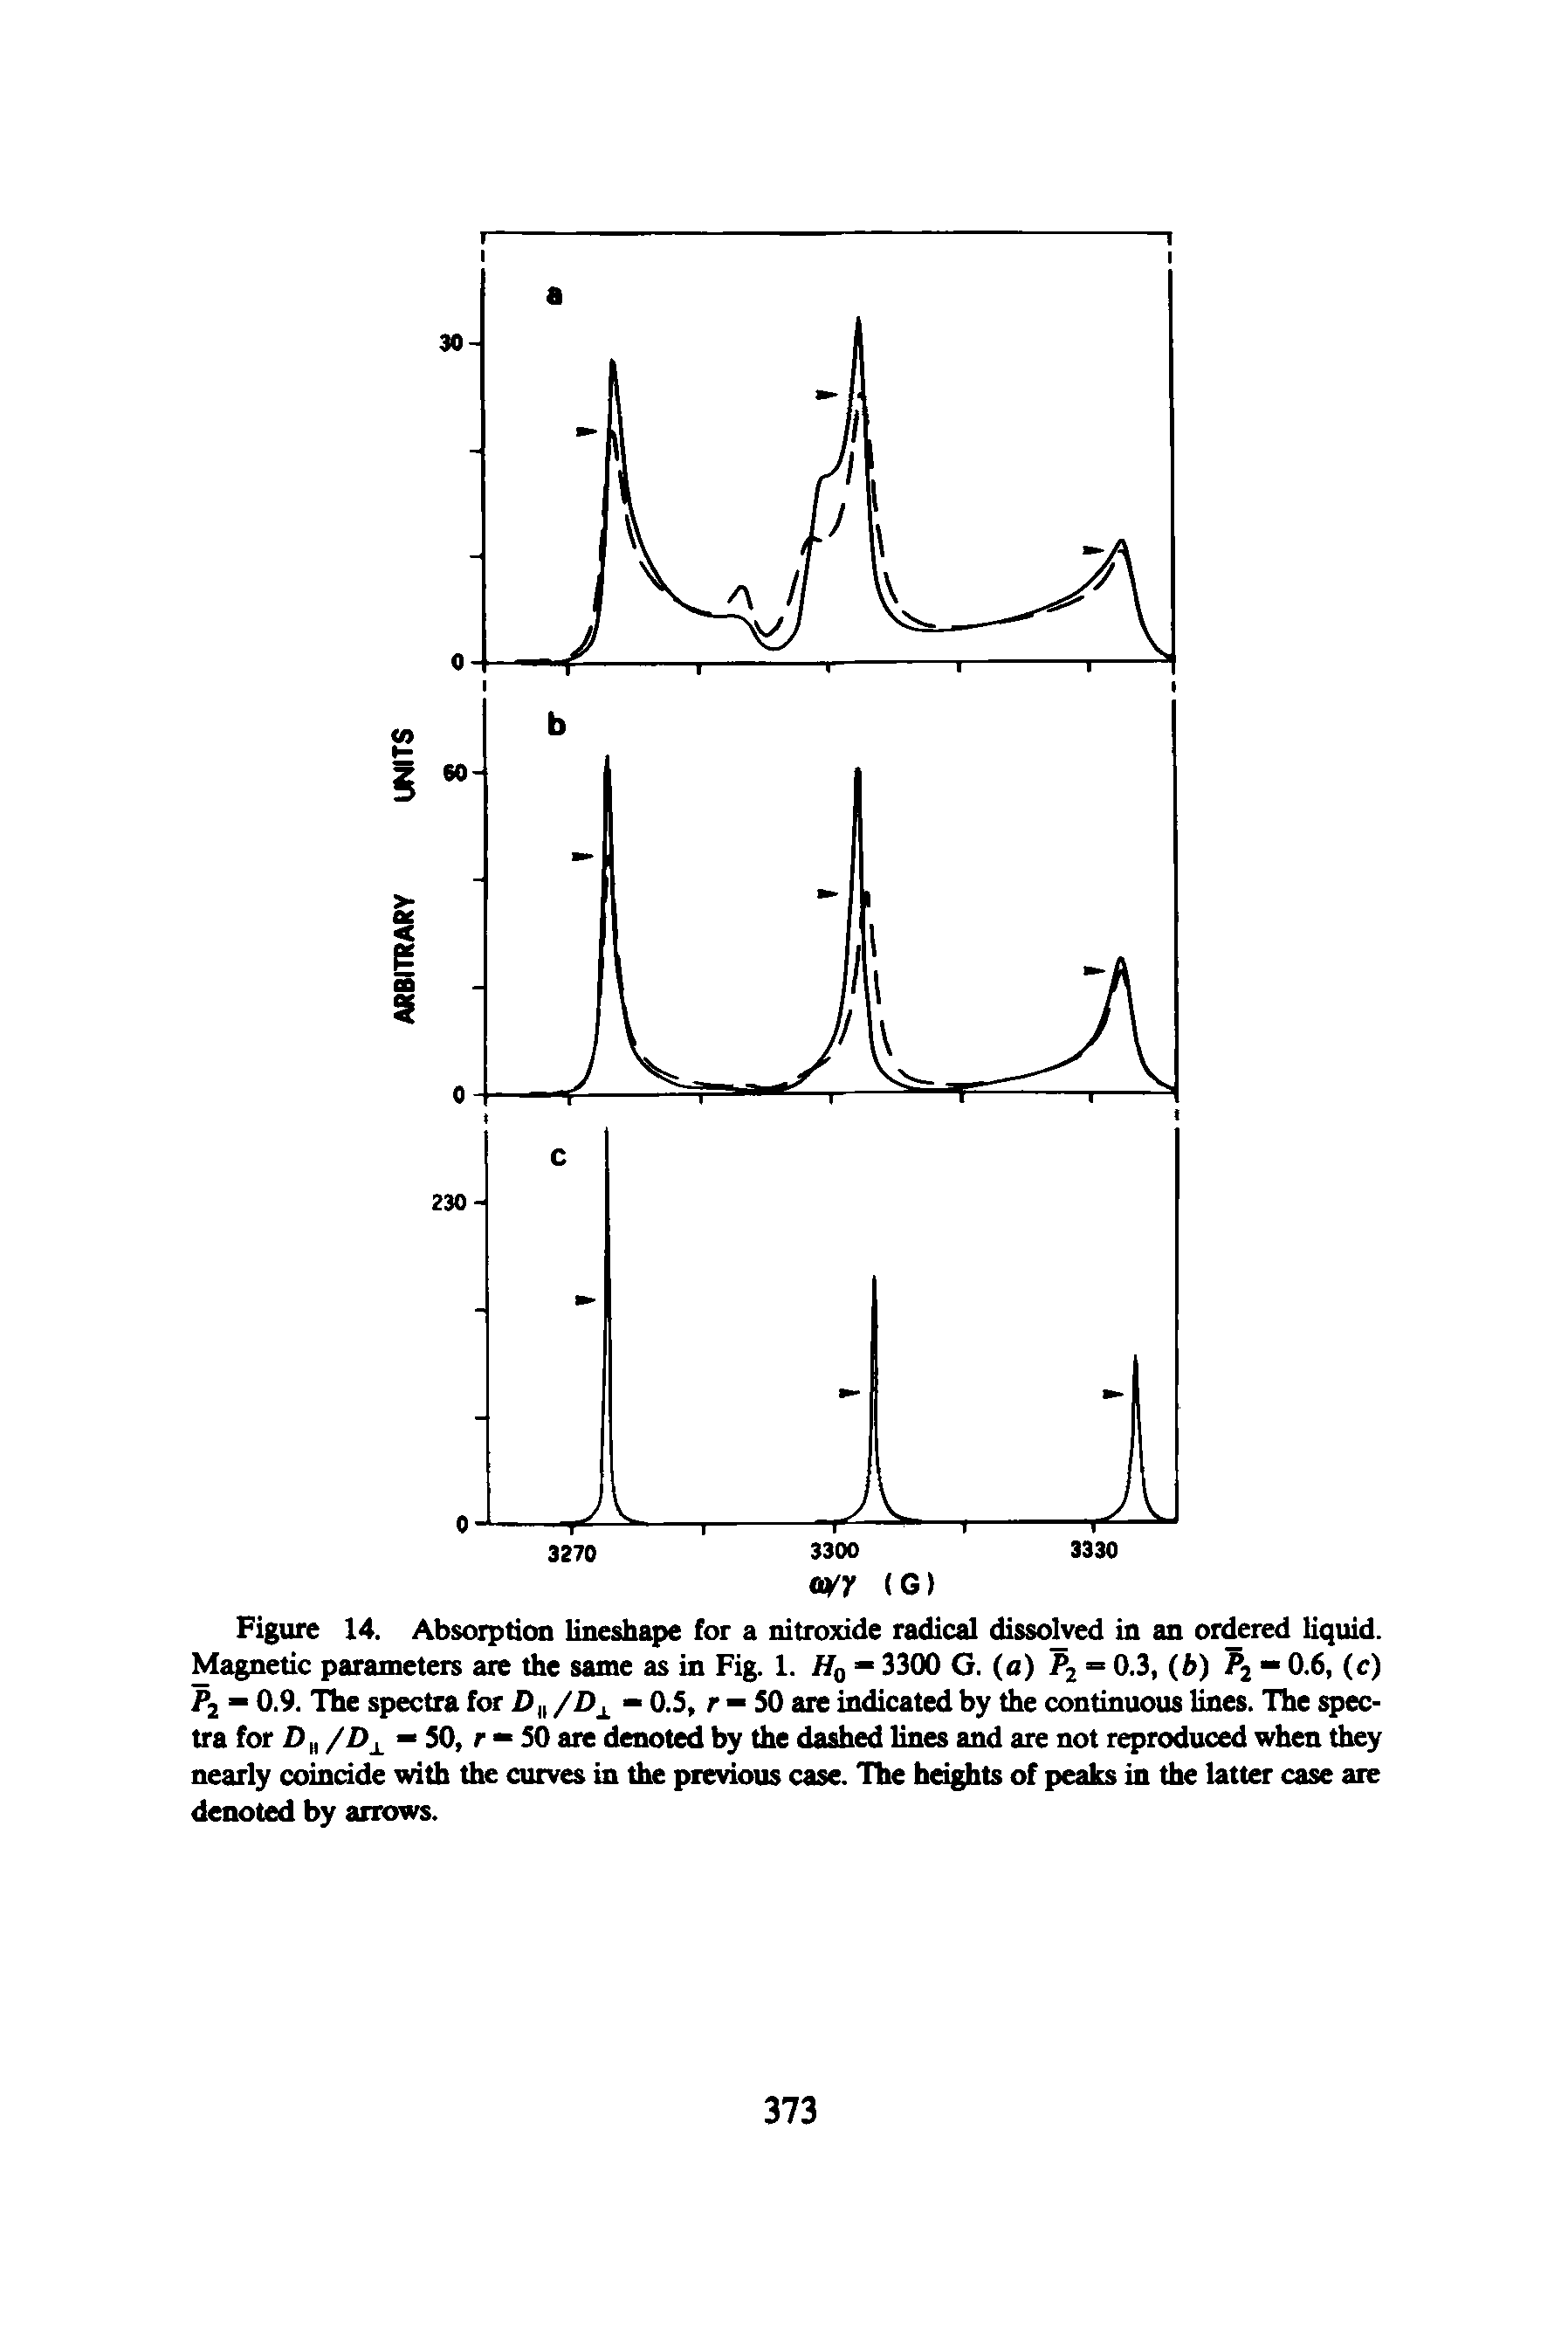 Figure 14. Absorption lineshape for a nitroxide radical dissolved in an ordered liquid. Magnetic parameters are the same as in Fig. 1. Hq — 3300 G. (a) = 0.3, (b) P2 0.6, (c)...